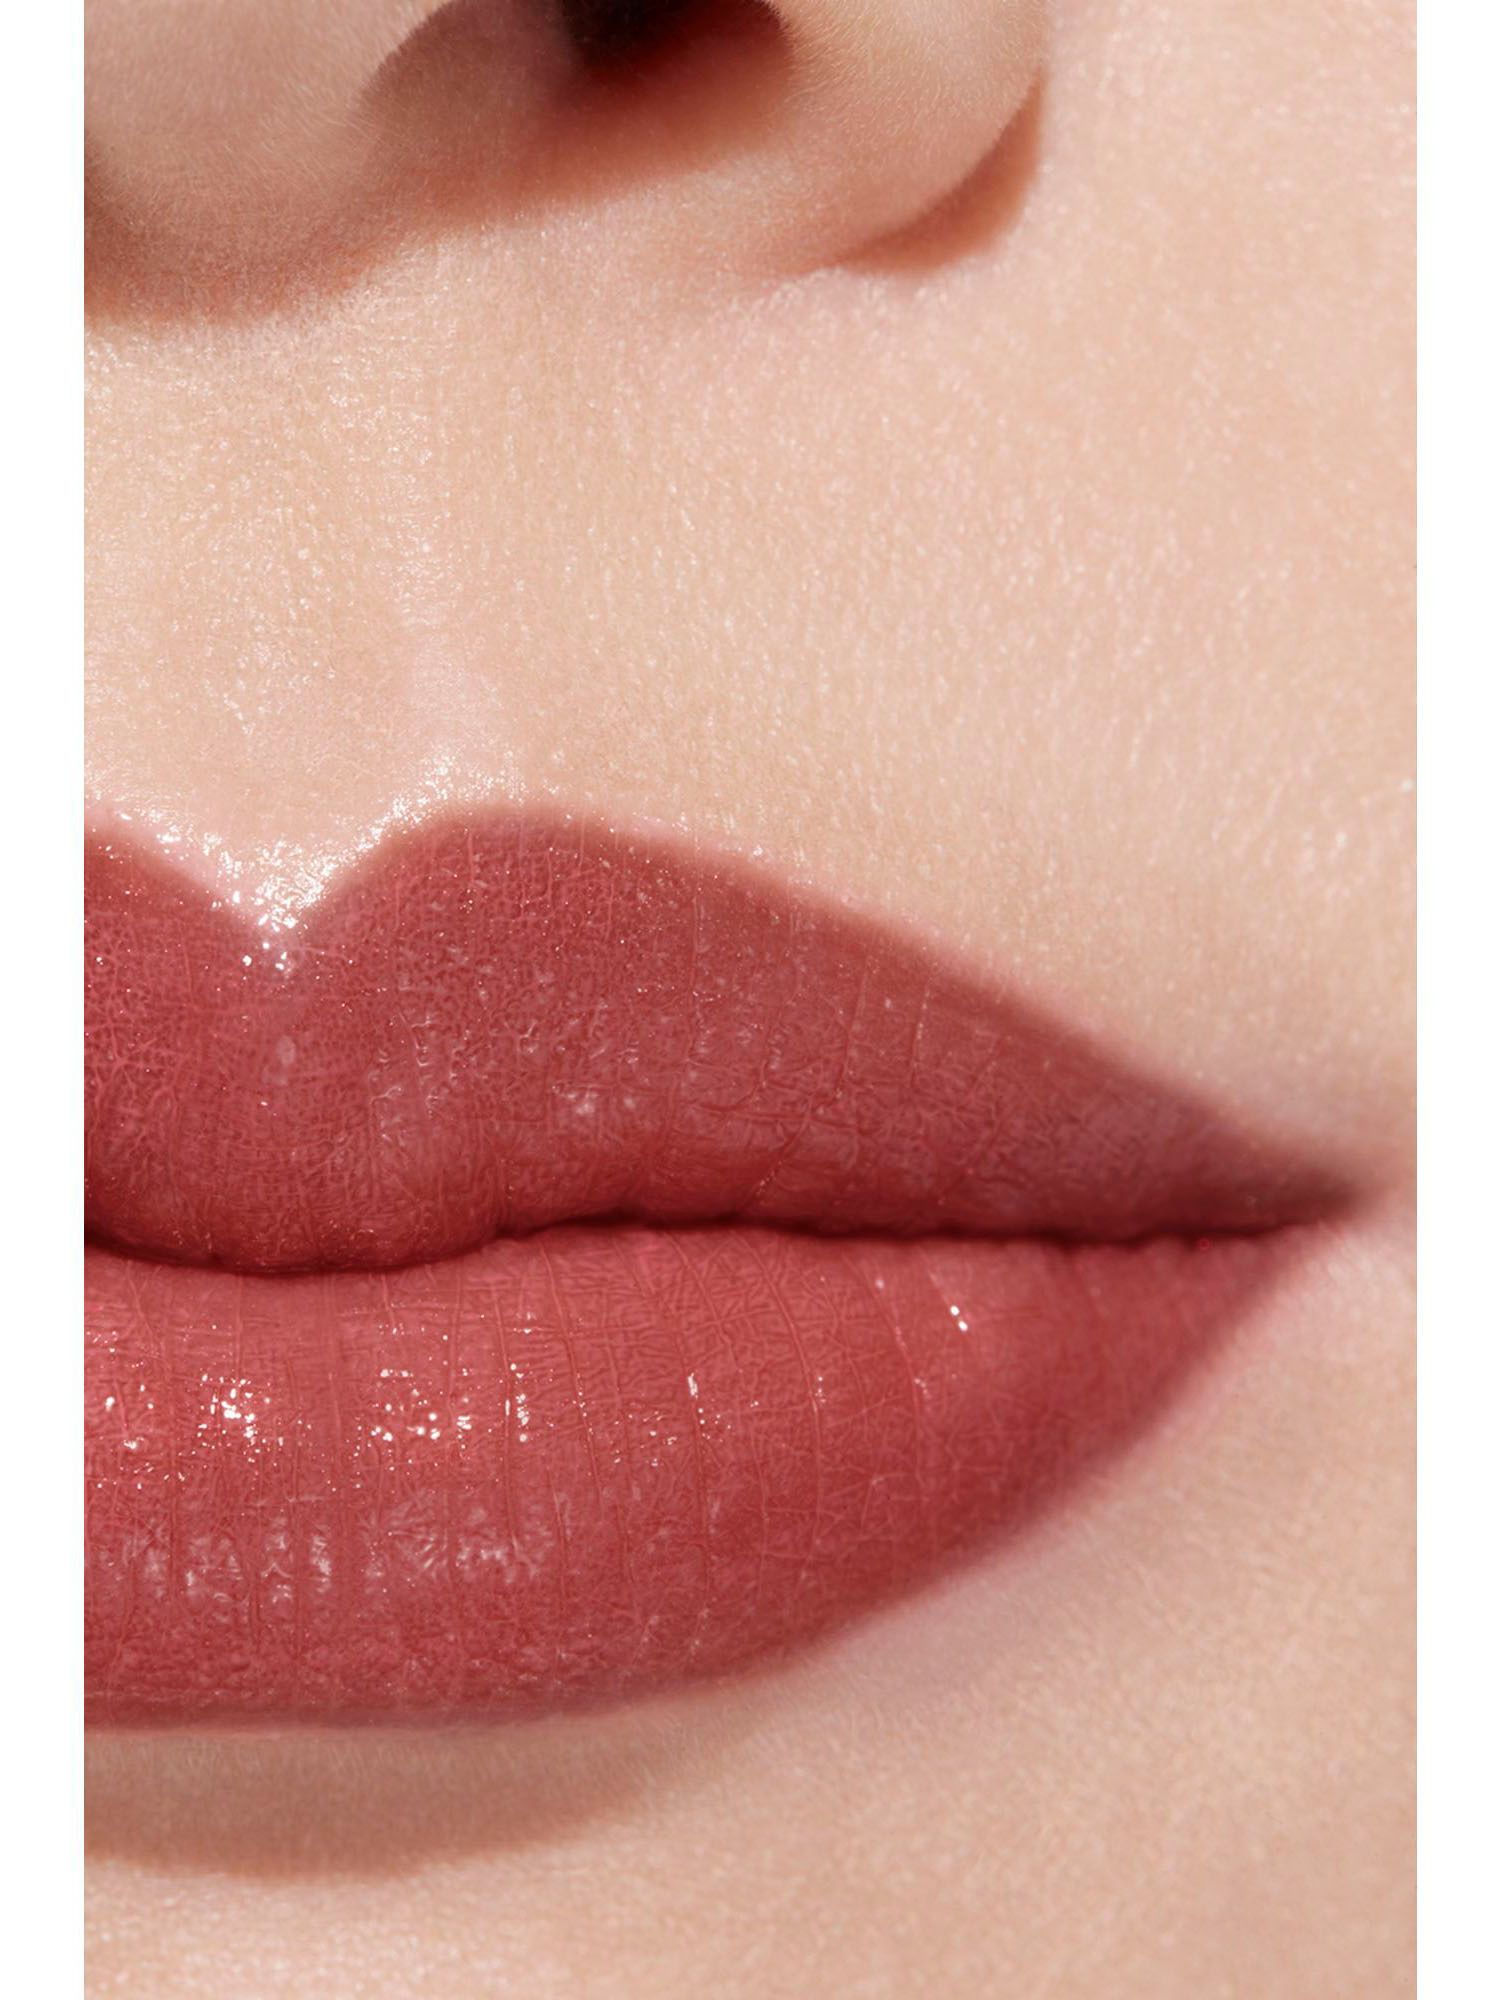 CHANEL Rouge Coco Baume, 928 Pink Delight at John Lewis & Partners